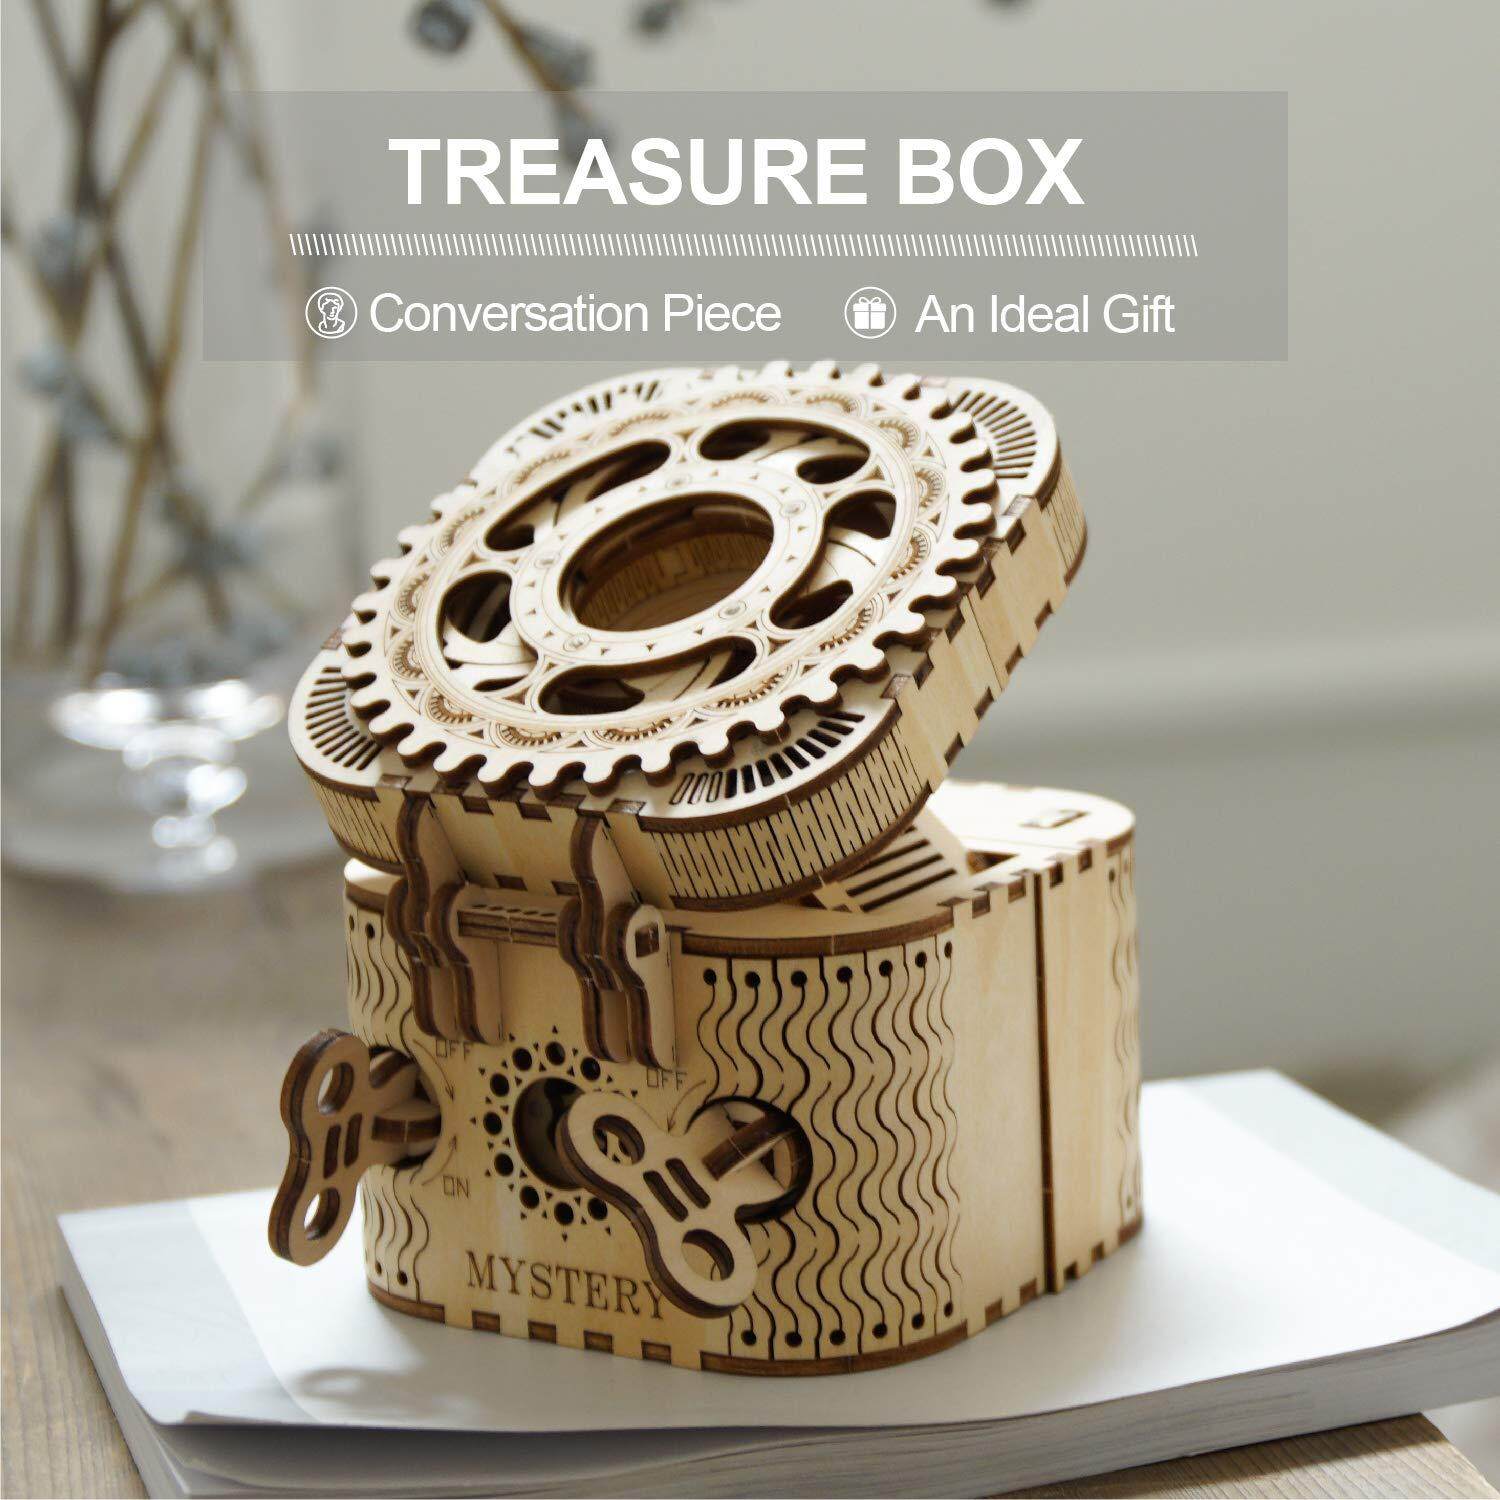 Treasure Box ROKR 3D Wooden Puzzle-Model Building Kits-DIY Assembled Toys-Brain Teaser Educational and Engineering for Girls,Boyfriend,Adults,DIY Lovers,When Christmas Birthday